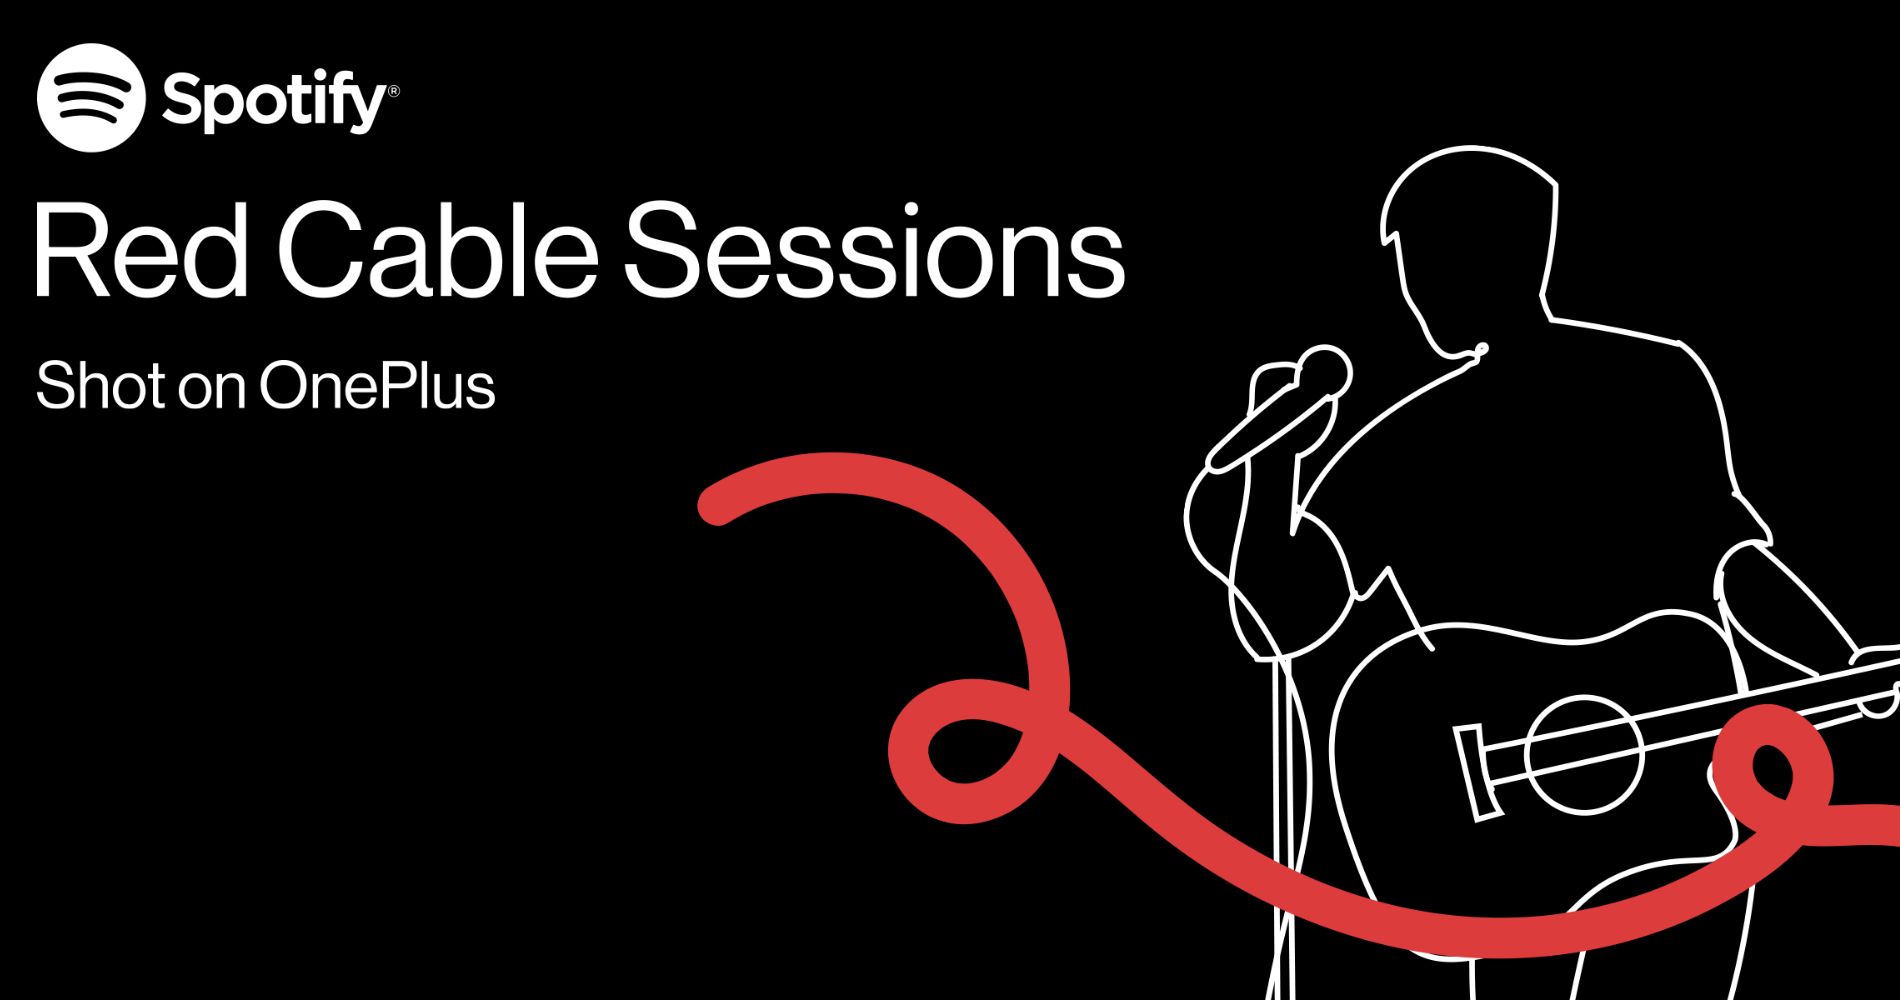 OnePlus collaborates with Spotify for ‘Red Cable Sessions’, a first-of-its-kind